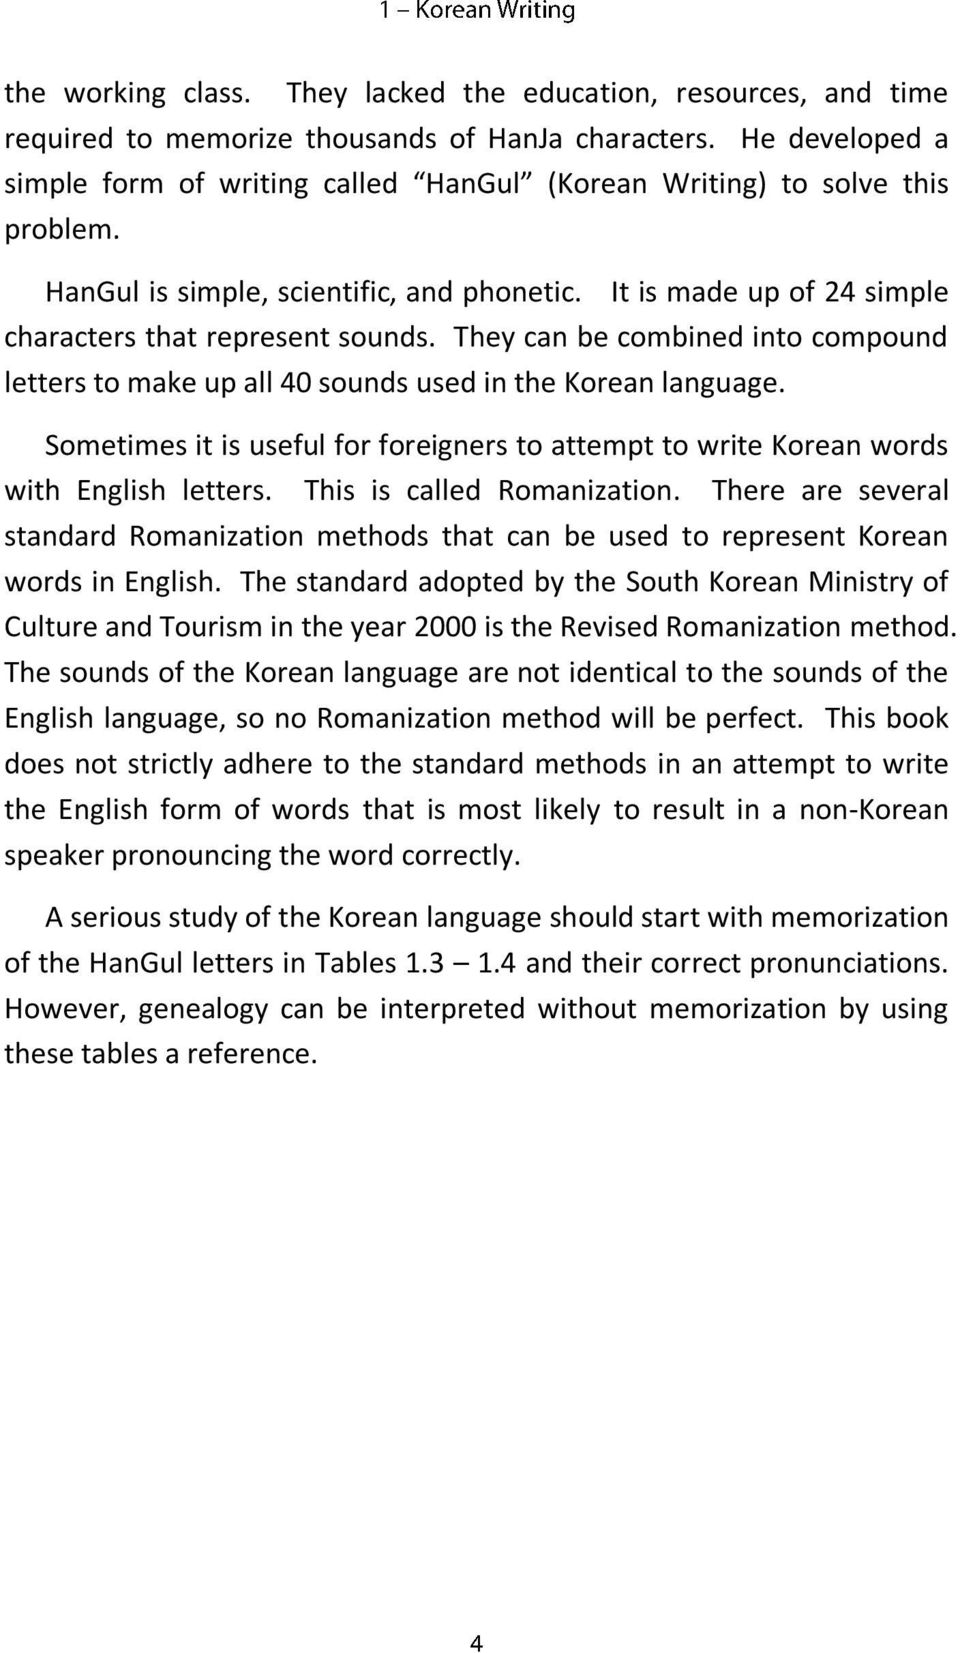 They can be combined into compound letters to make up all 40 sounds used in the Korean language. Sometimes it is useful for foreigners to attempt to write Korean words with English letters.